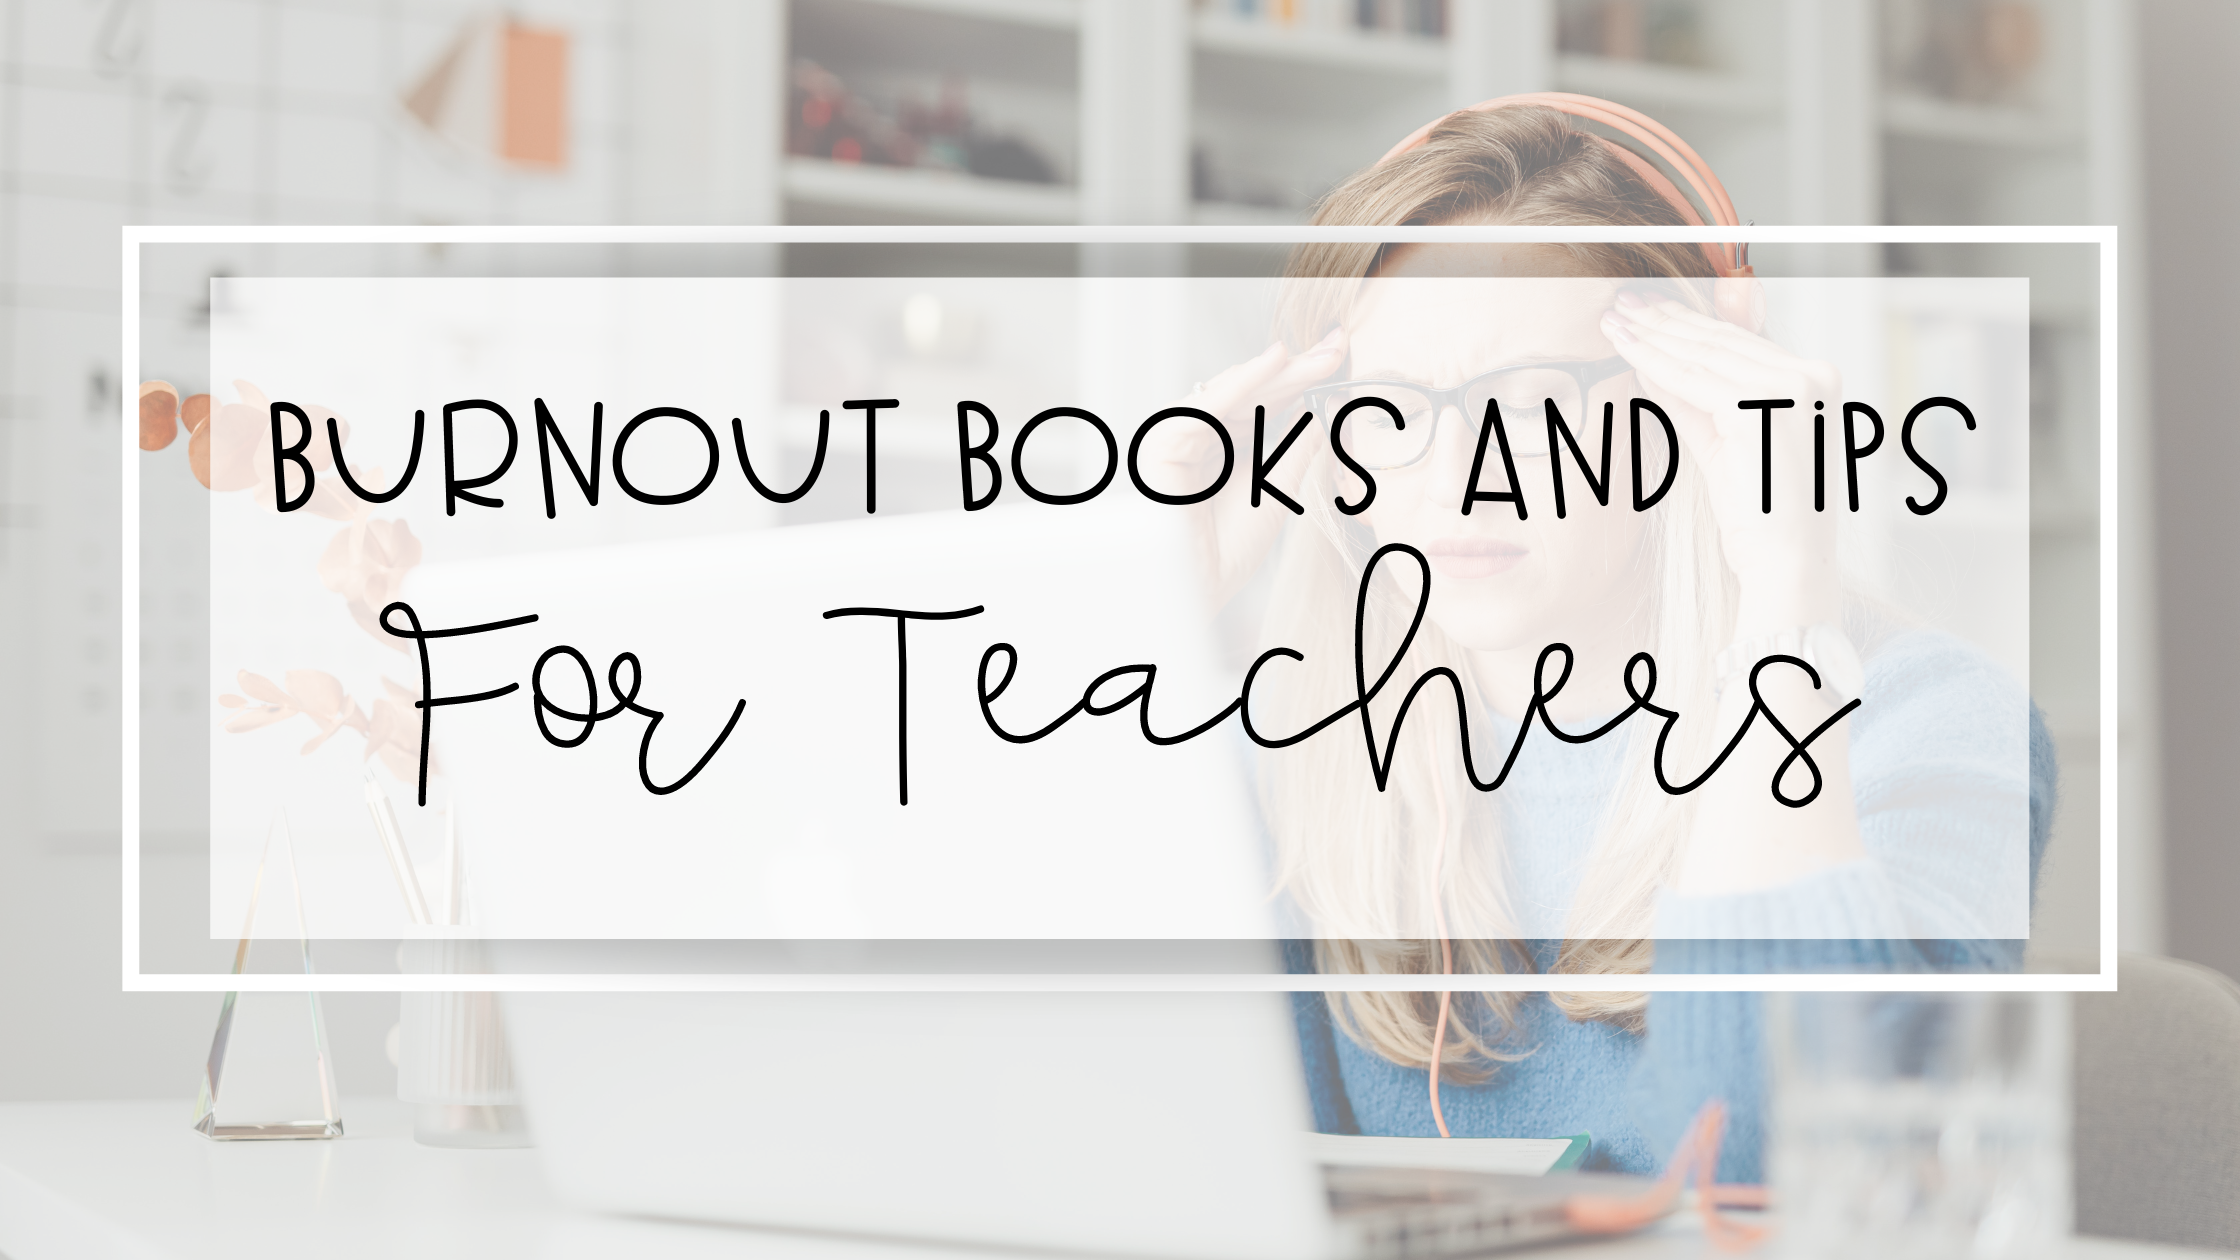 Helpful Tips and Best Books on Burnout For Teachers